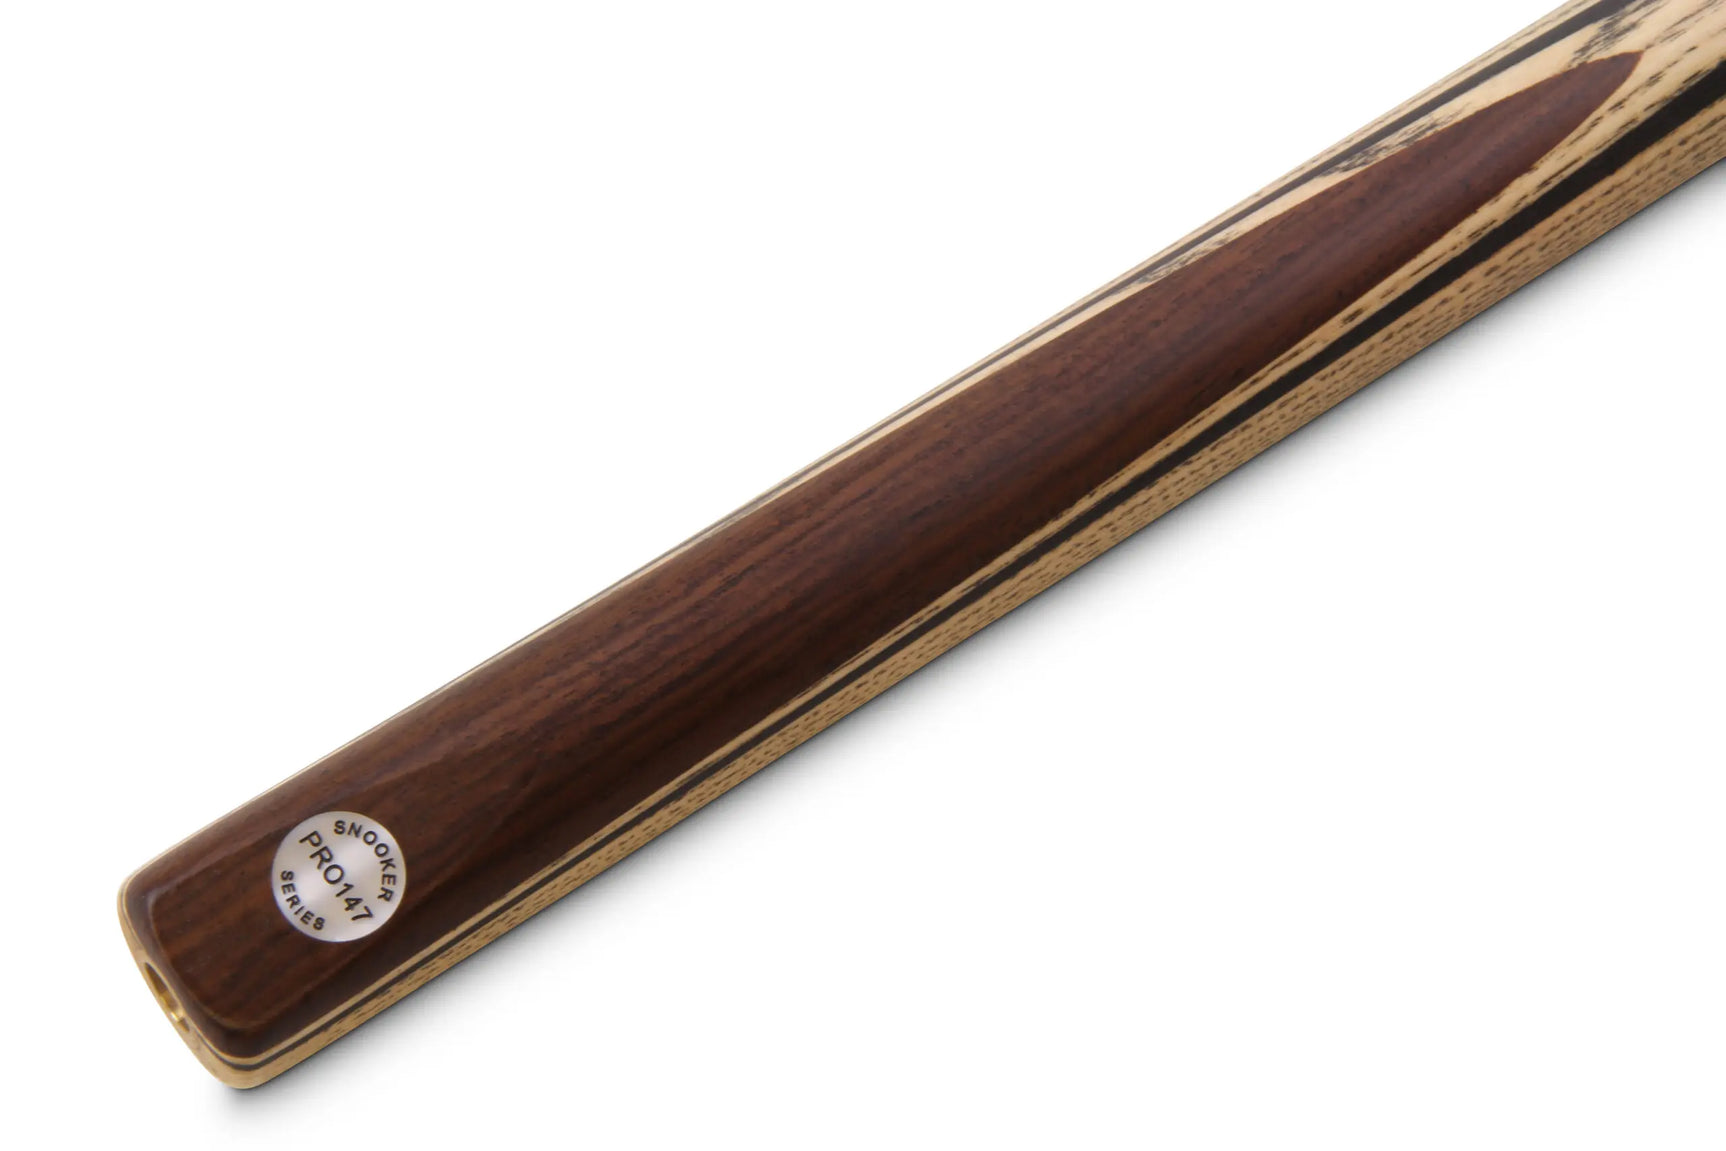 PRO147 Walnut Ash 57 Inch 2 Piece Centre Joint Snooker Pool Cue and Case Set 9.5mm Tip with Black Attache Hard Case